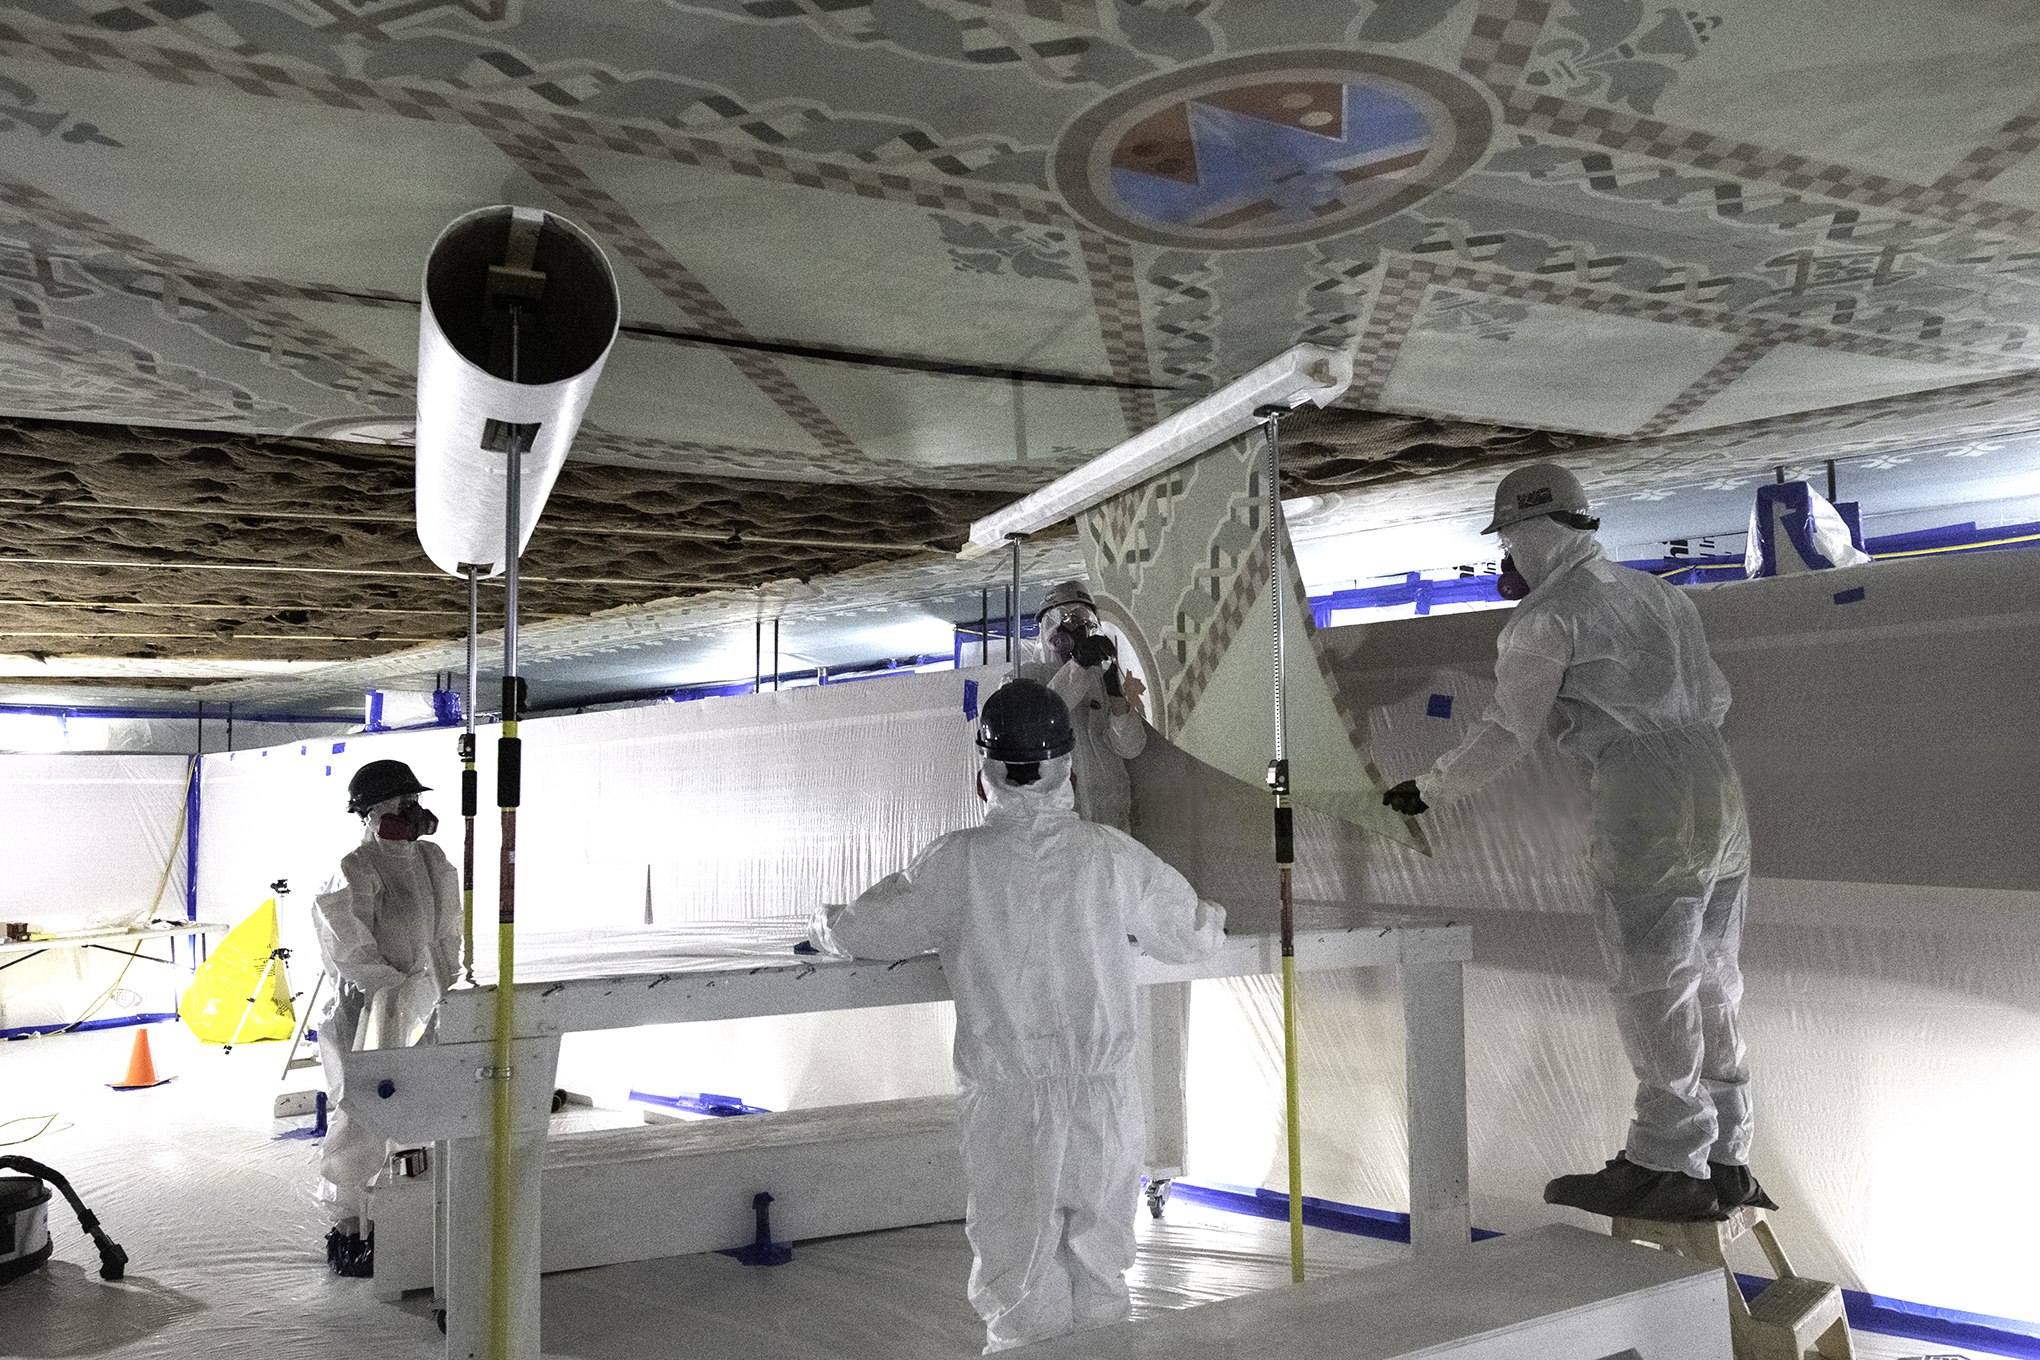 Three workers wearing protective equipment remove painted fabric from a ceiling and wind it onto a large spool.